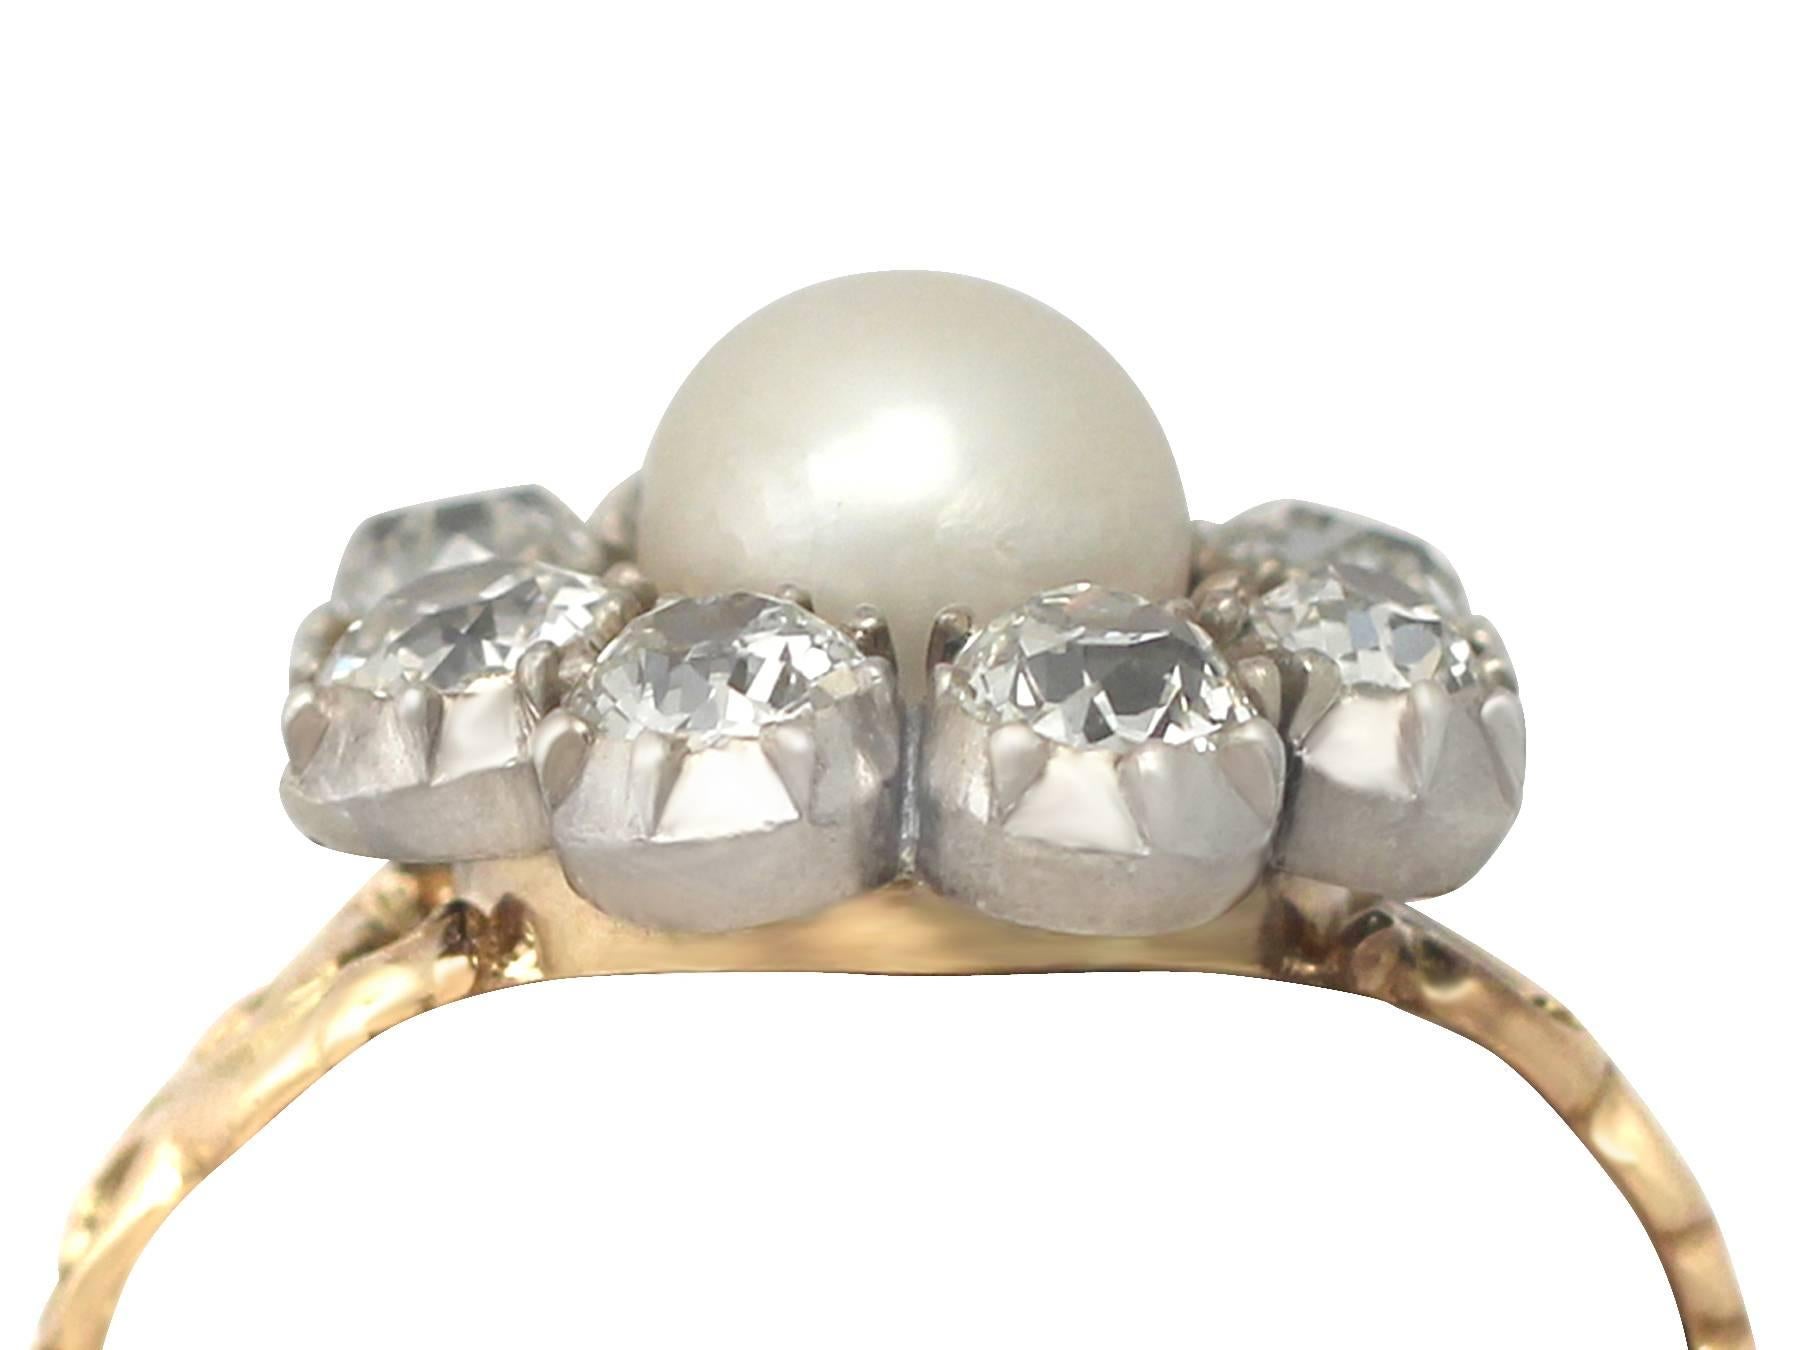 A stunning, find and impressive antique natural pearl and 1.62 carat diamond, 15k yellow gold, silver set dress ring from the Regency Period; part of our diverse antique jewellery and estate jewelry collections

This stunning, fine and impressive